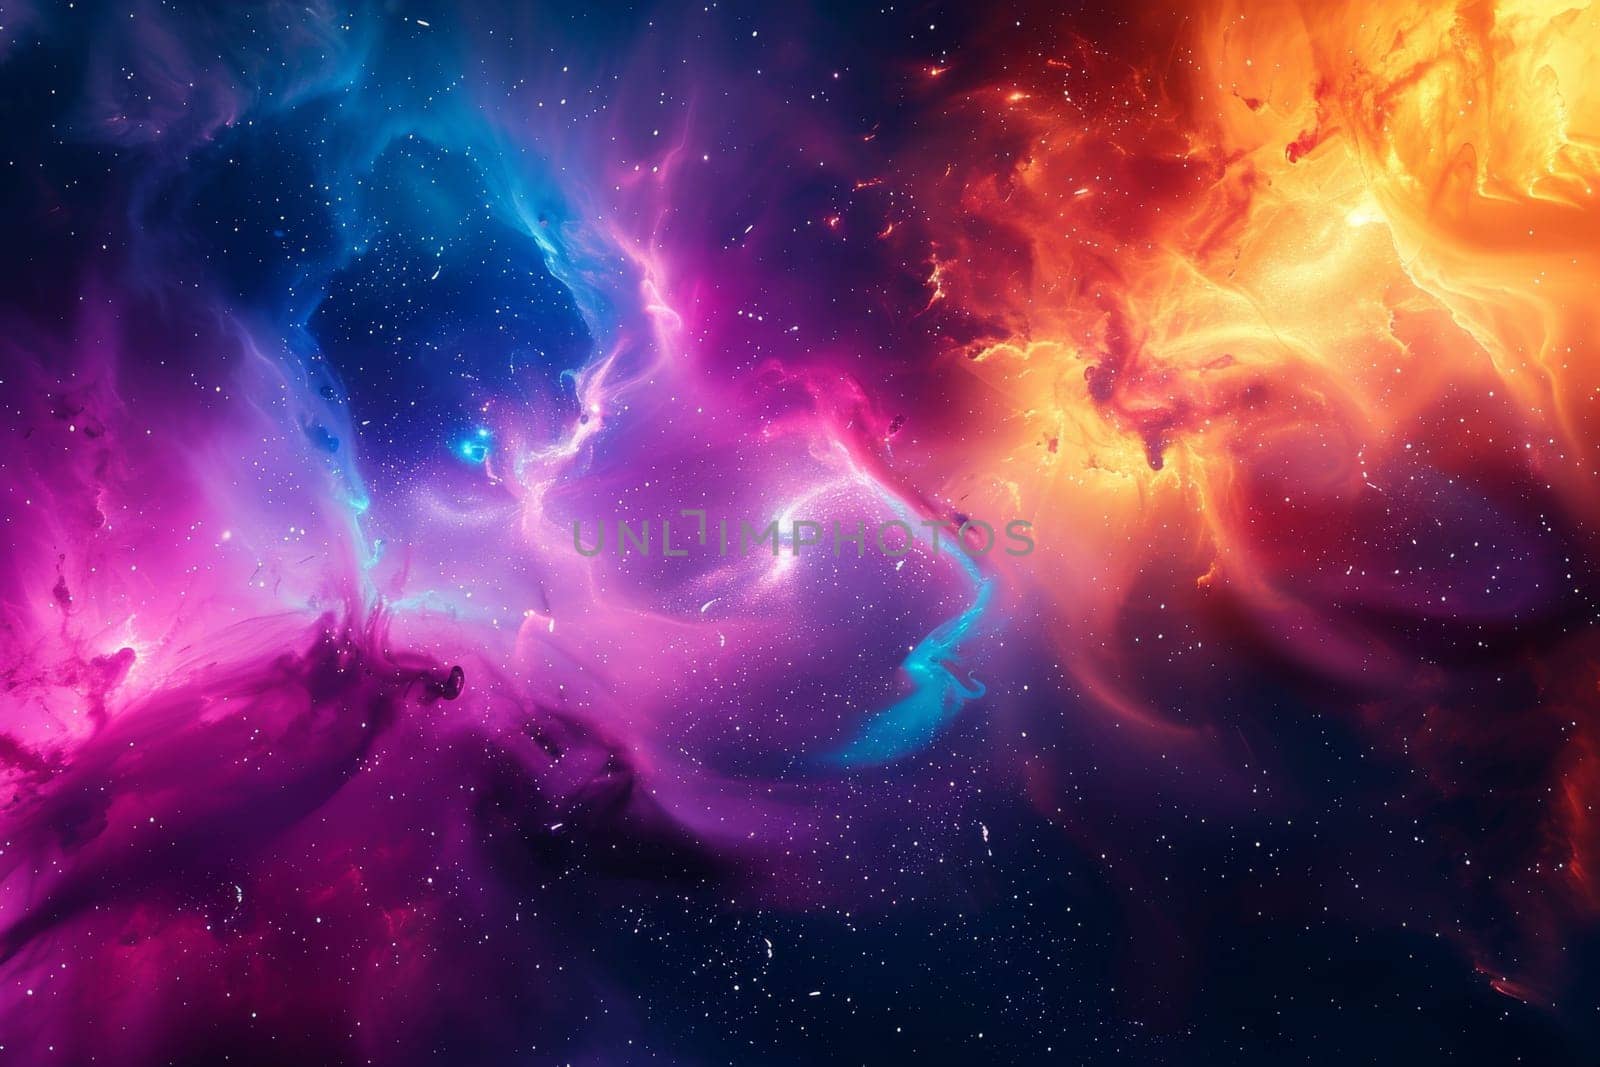 A colorful space scene with a purple cloud in the middle. The sky is filled with stars and the colors are vibrant